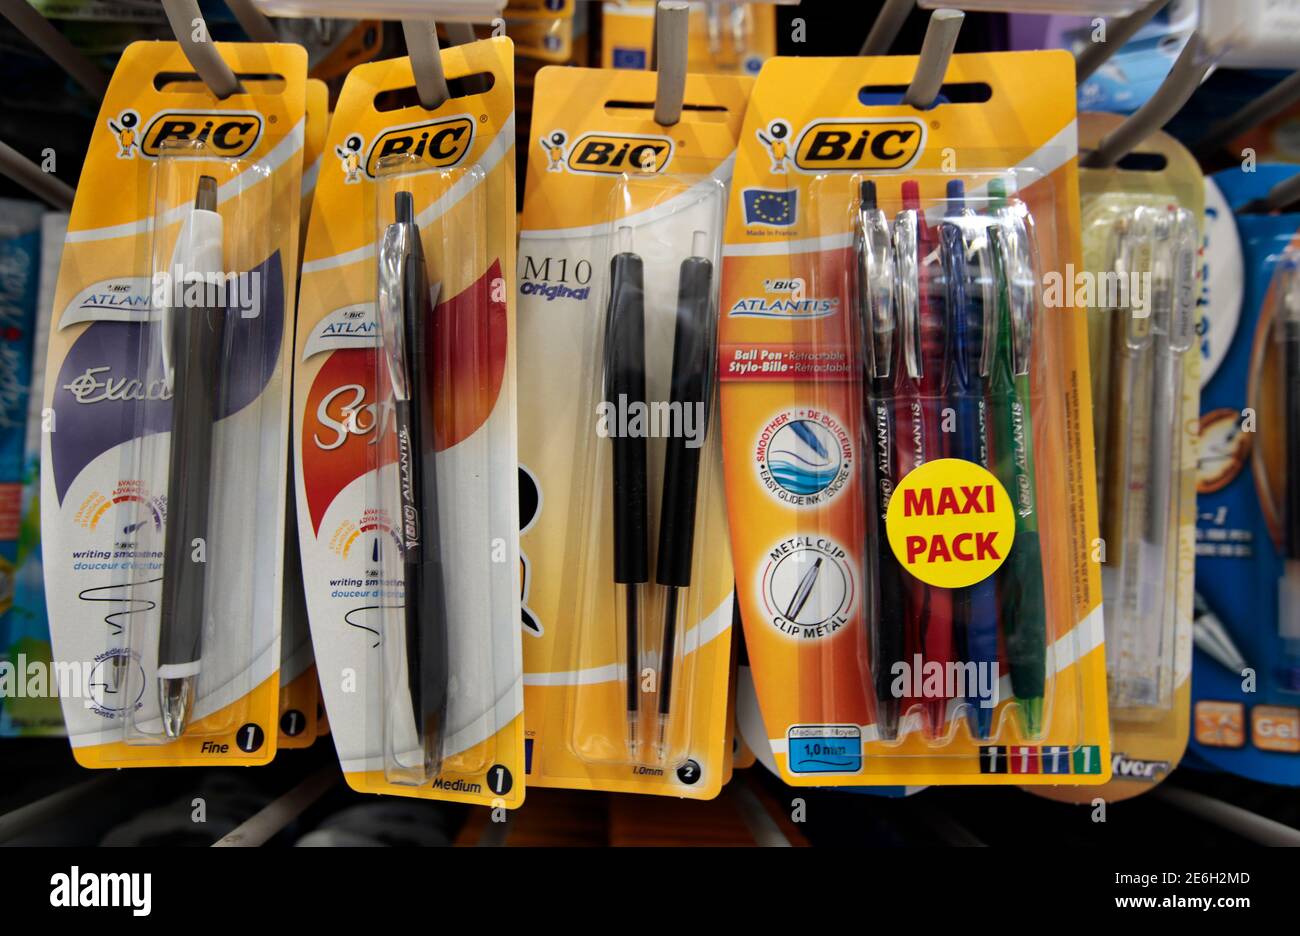 Pens made by BIC are seen on racks at a Carrefour hypermarket in Nice,  France, April 6, 2016. REUTERS/Eric Gaillard Stock Photo - Alamy